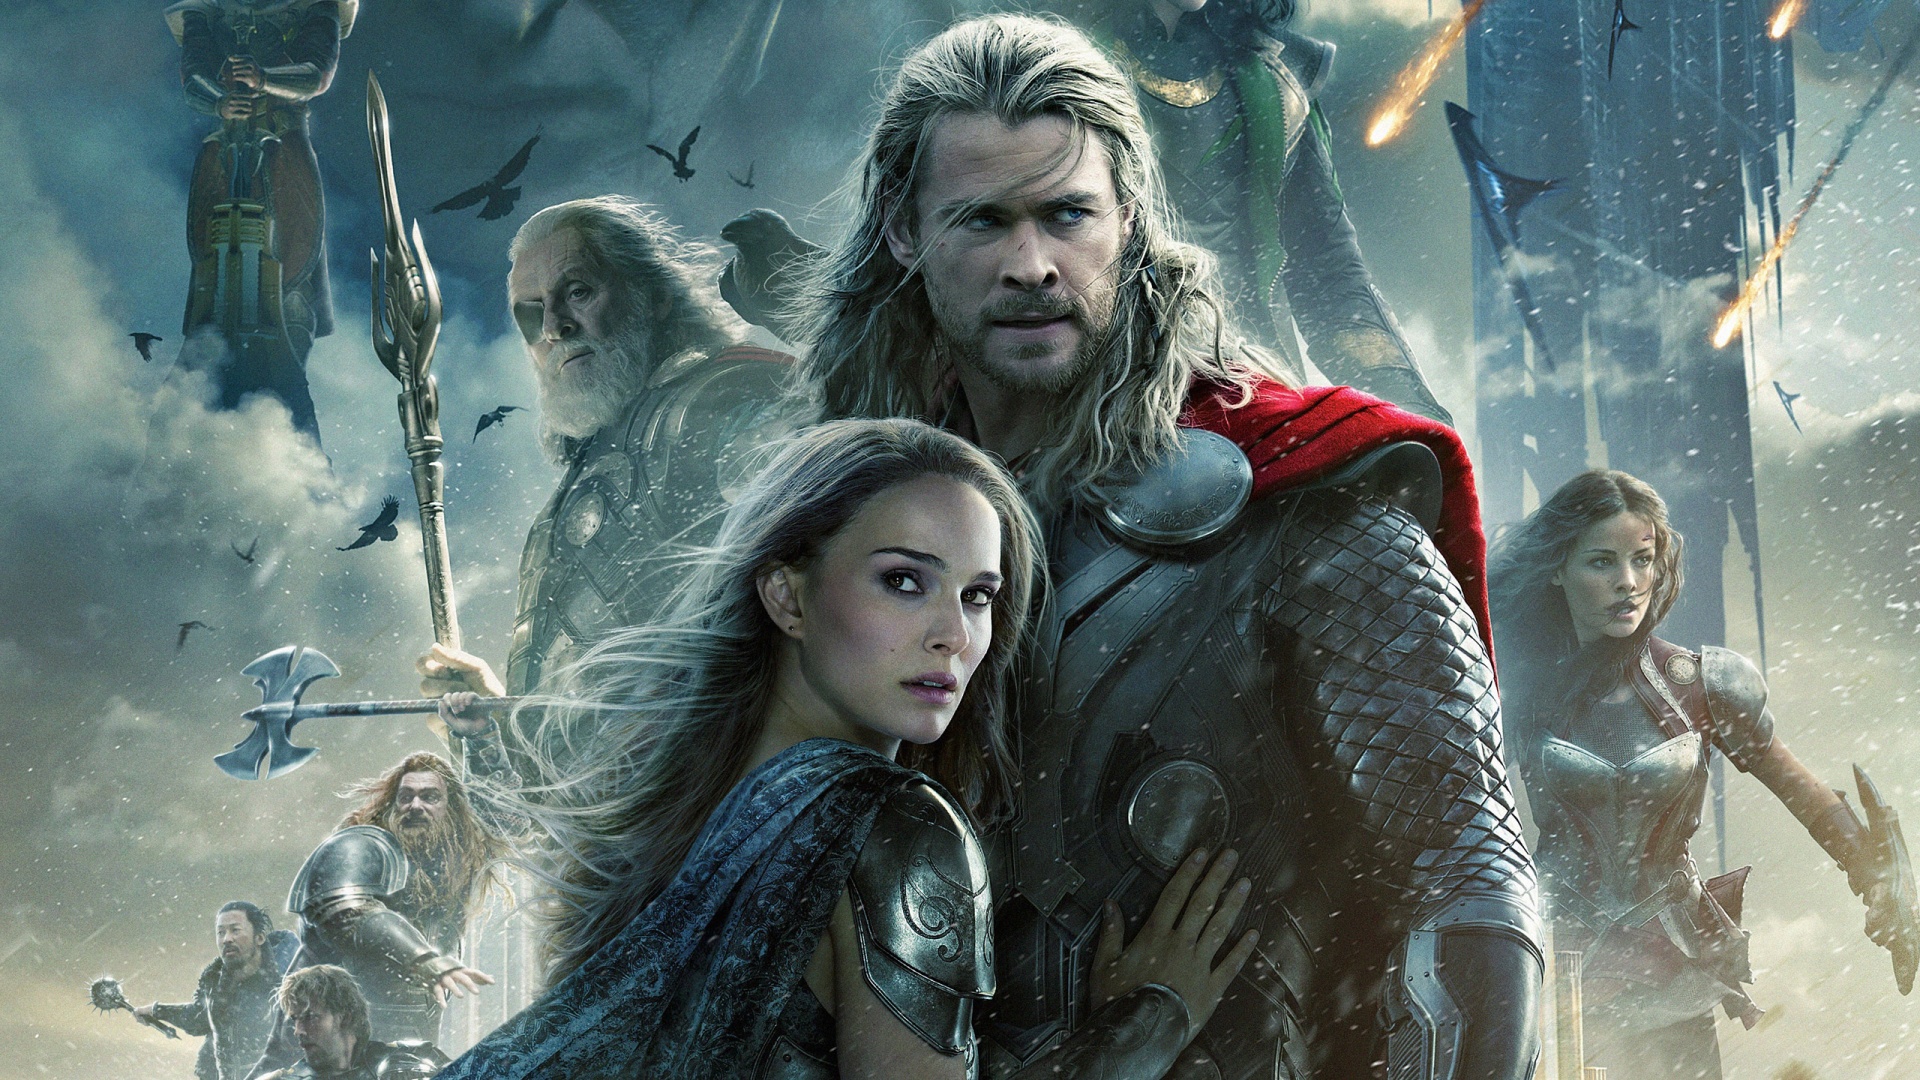 Marvel Live Action Movies Image Thor Dark World HD Wallpaper And